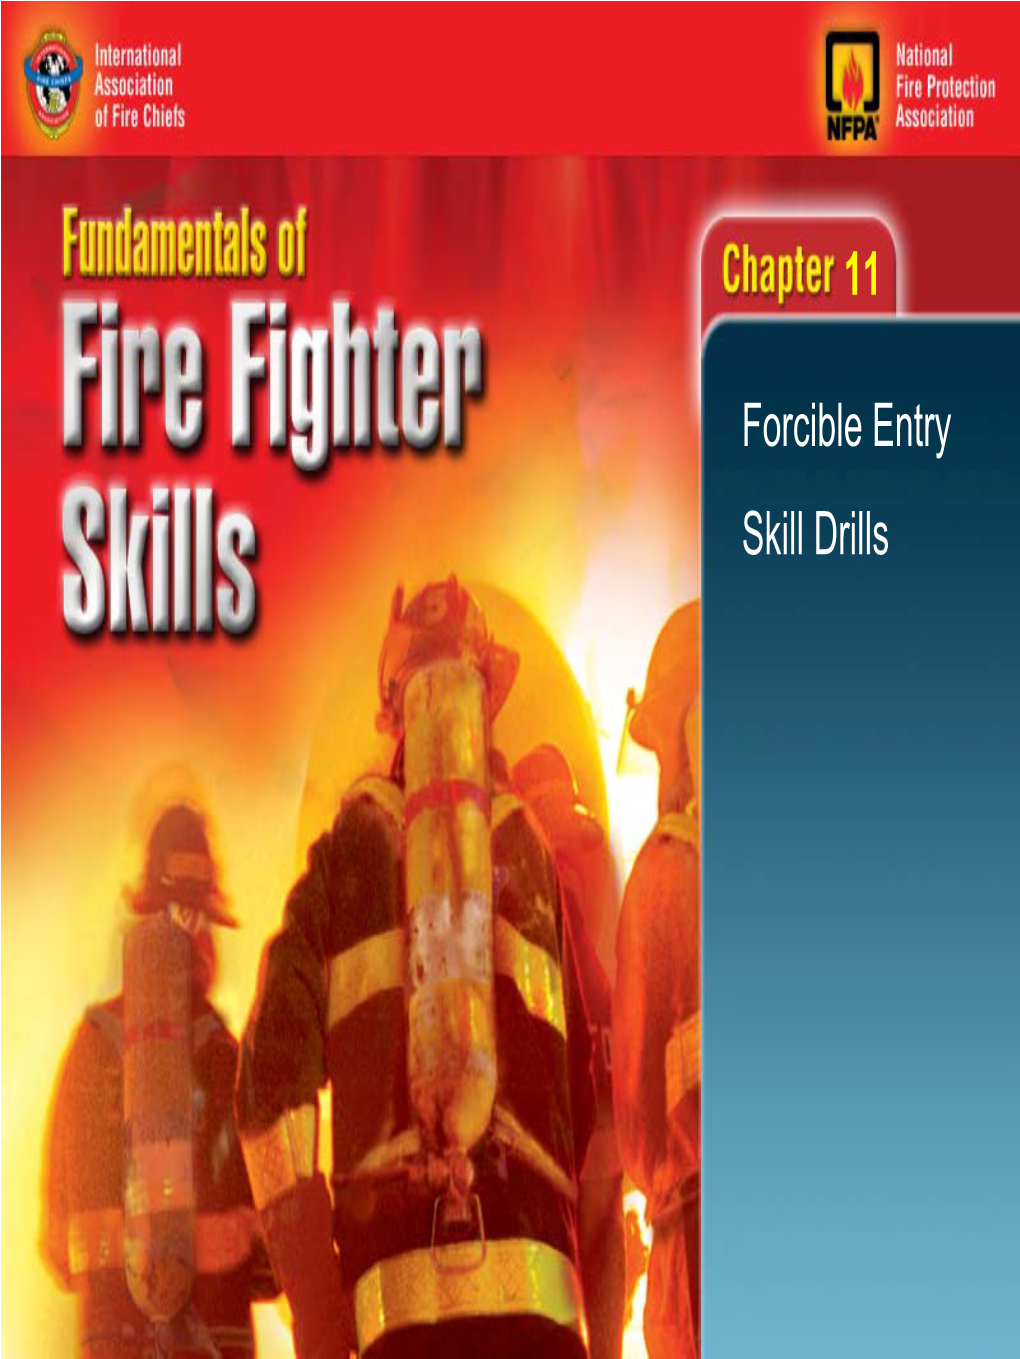 Forcible Entry Skill Drills 11